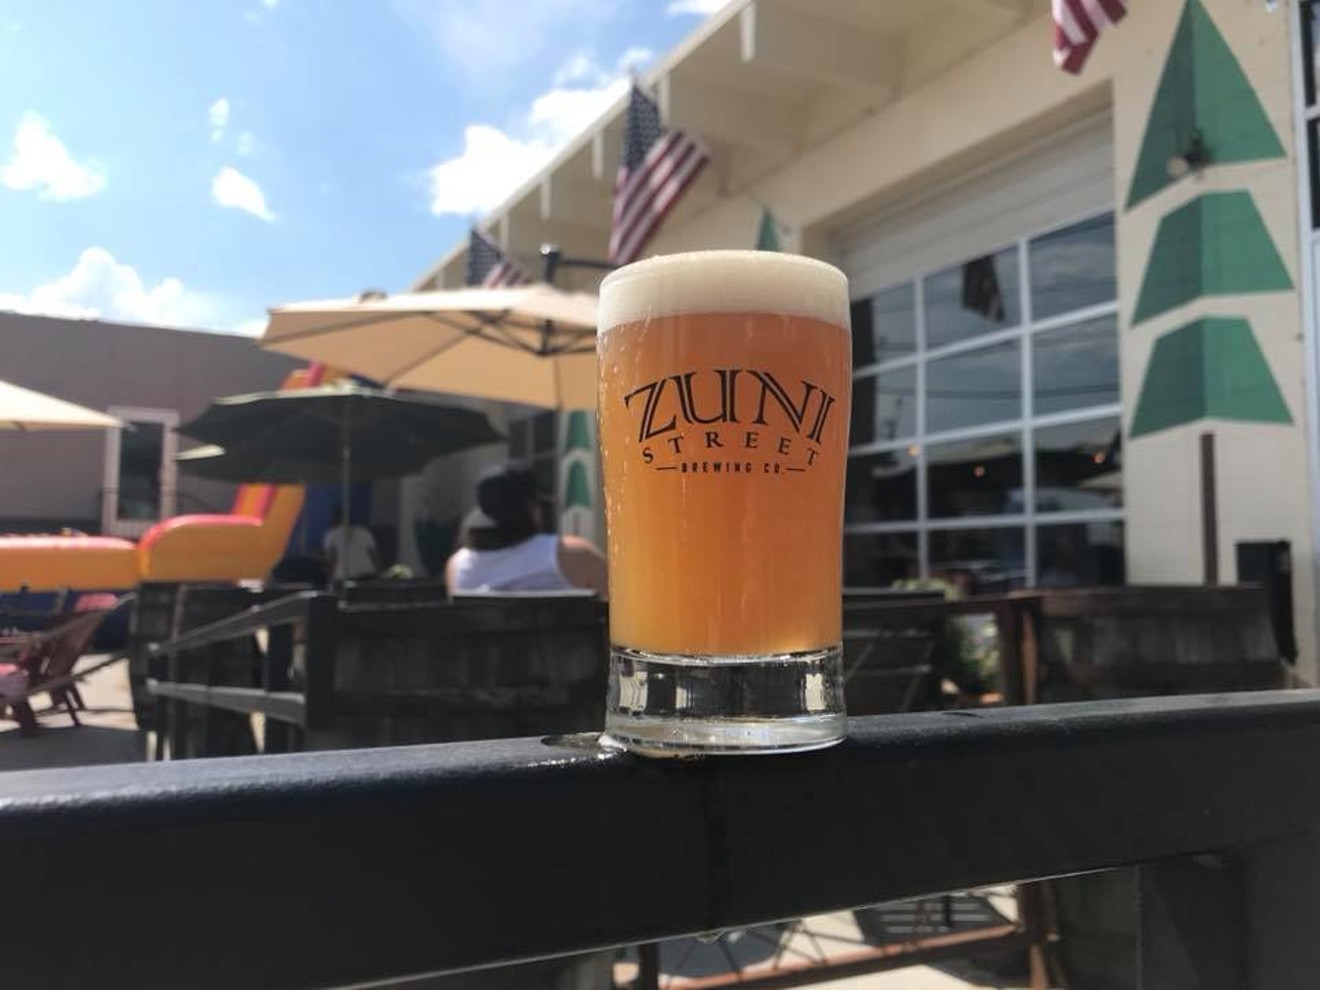 Wash down your championship hot dog eating frenzy with a hazy beer from Zuni Street.